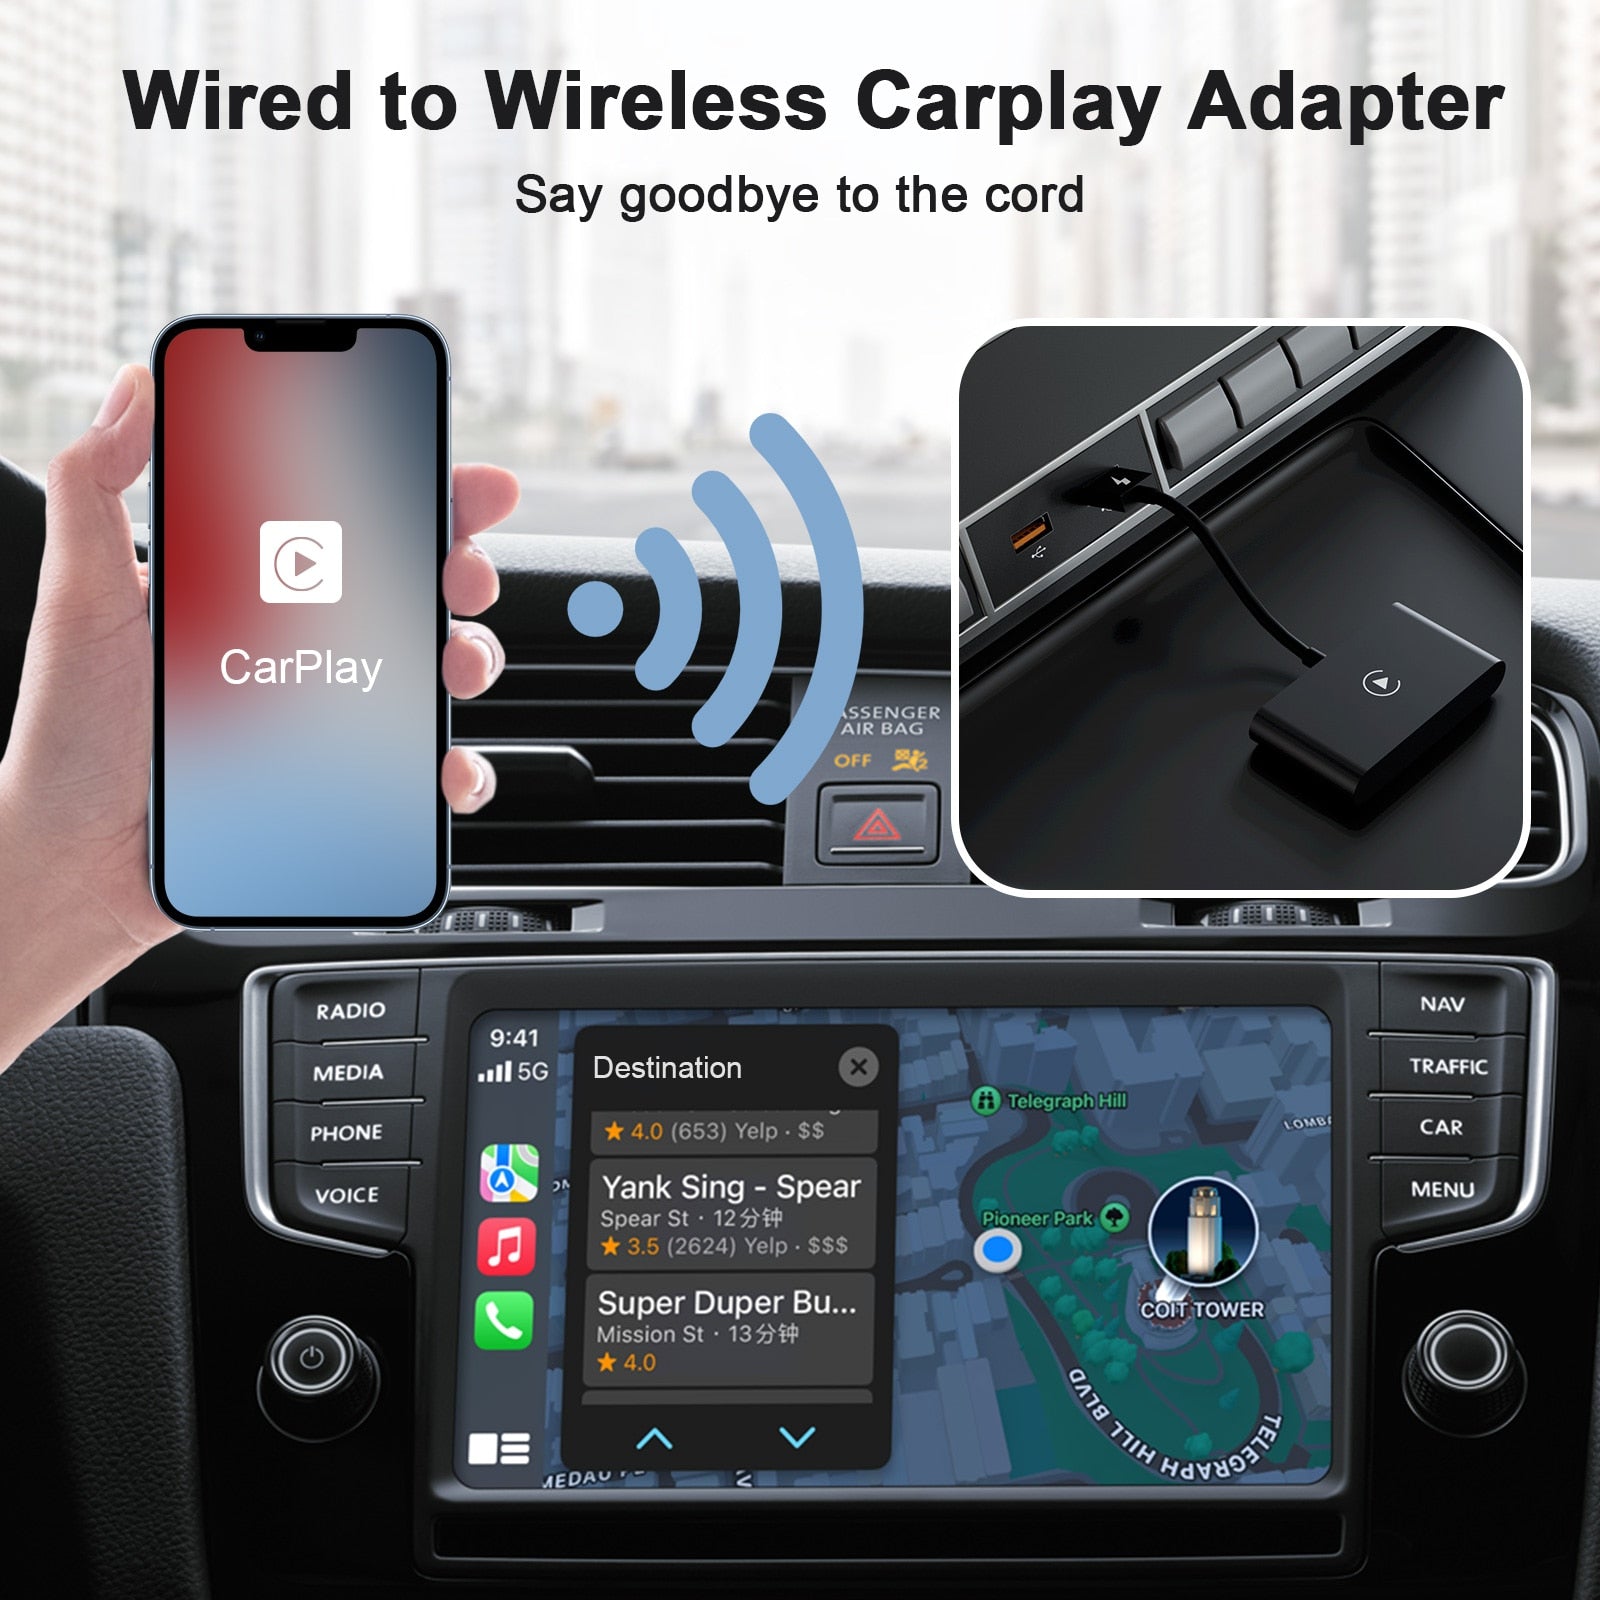 Wireless Car Play Adapter For Wired To Wireless For Android or Apple Auto Dongle Bluetooth 5GHz WiFi with USB C OTG Converter-Masscheap